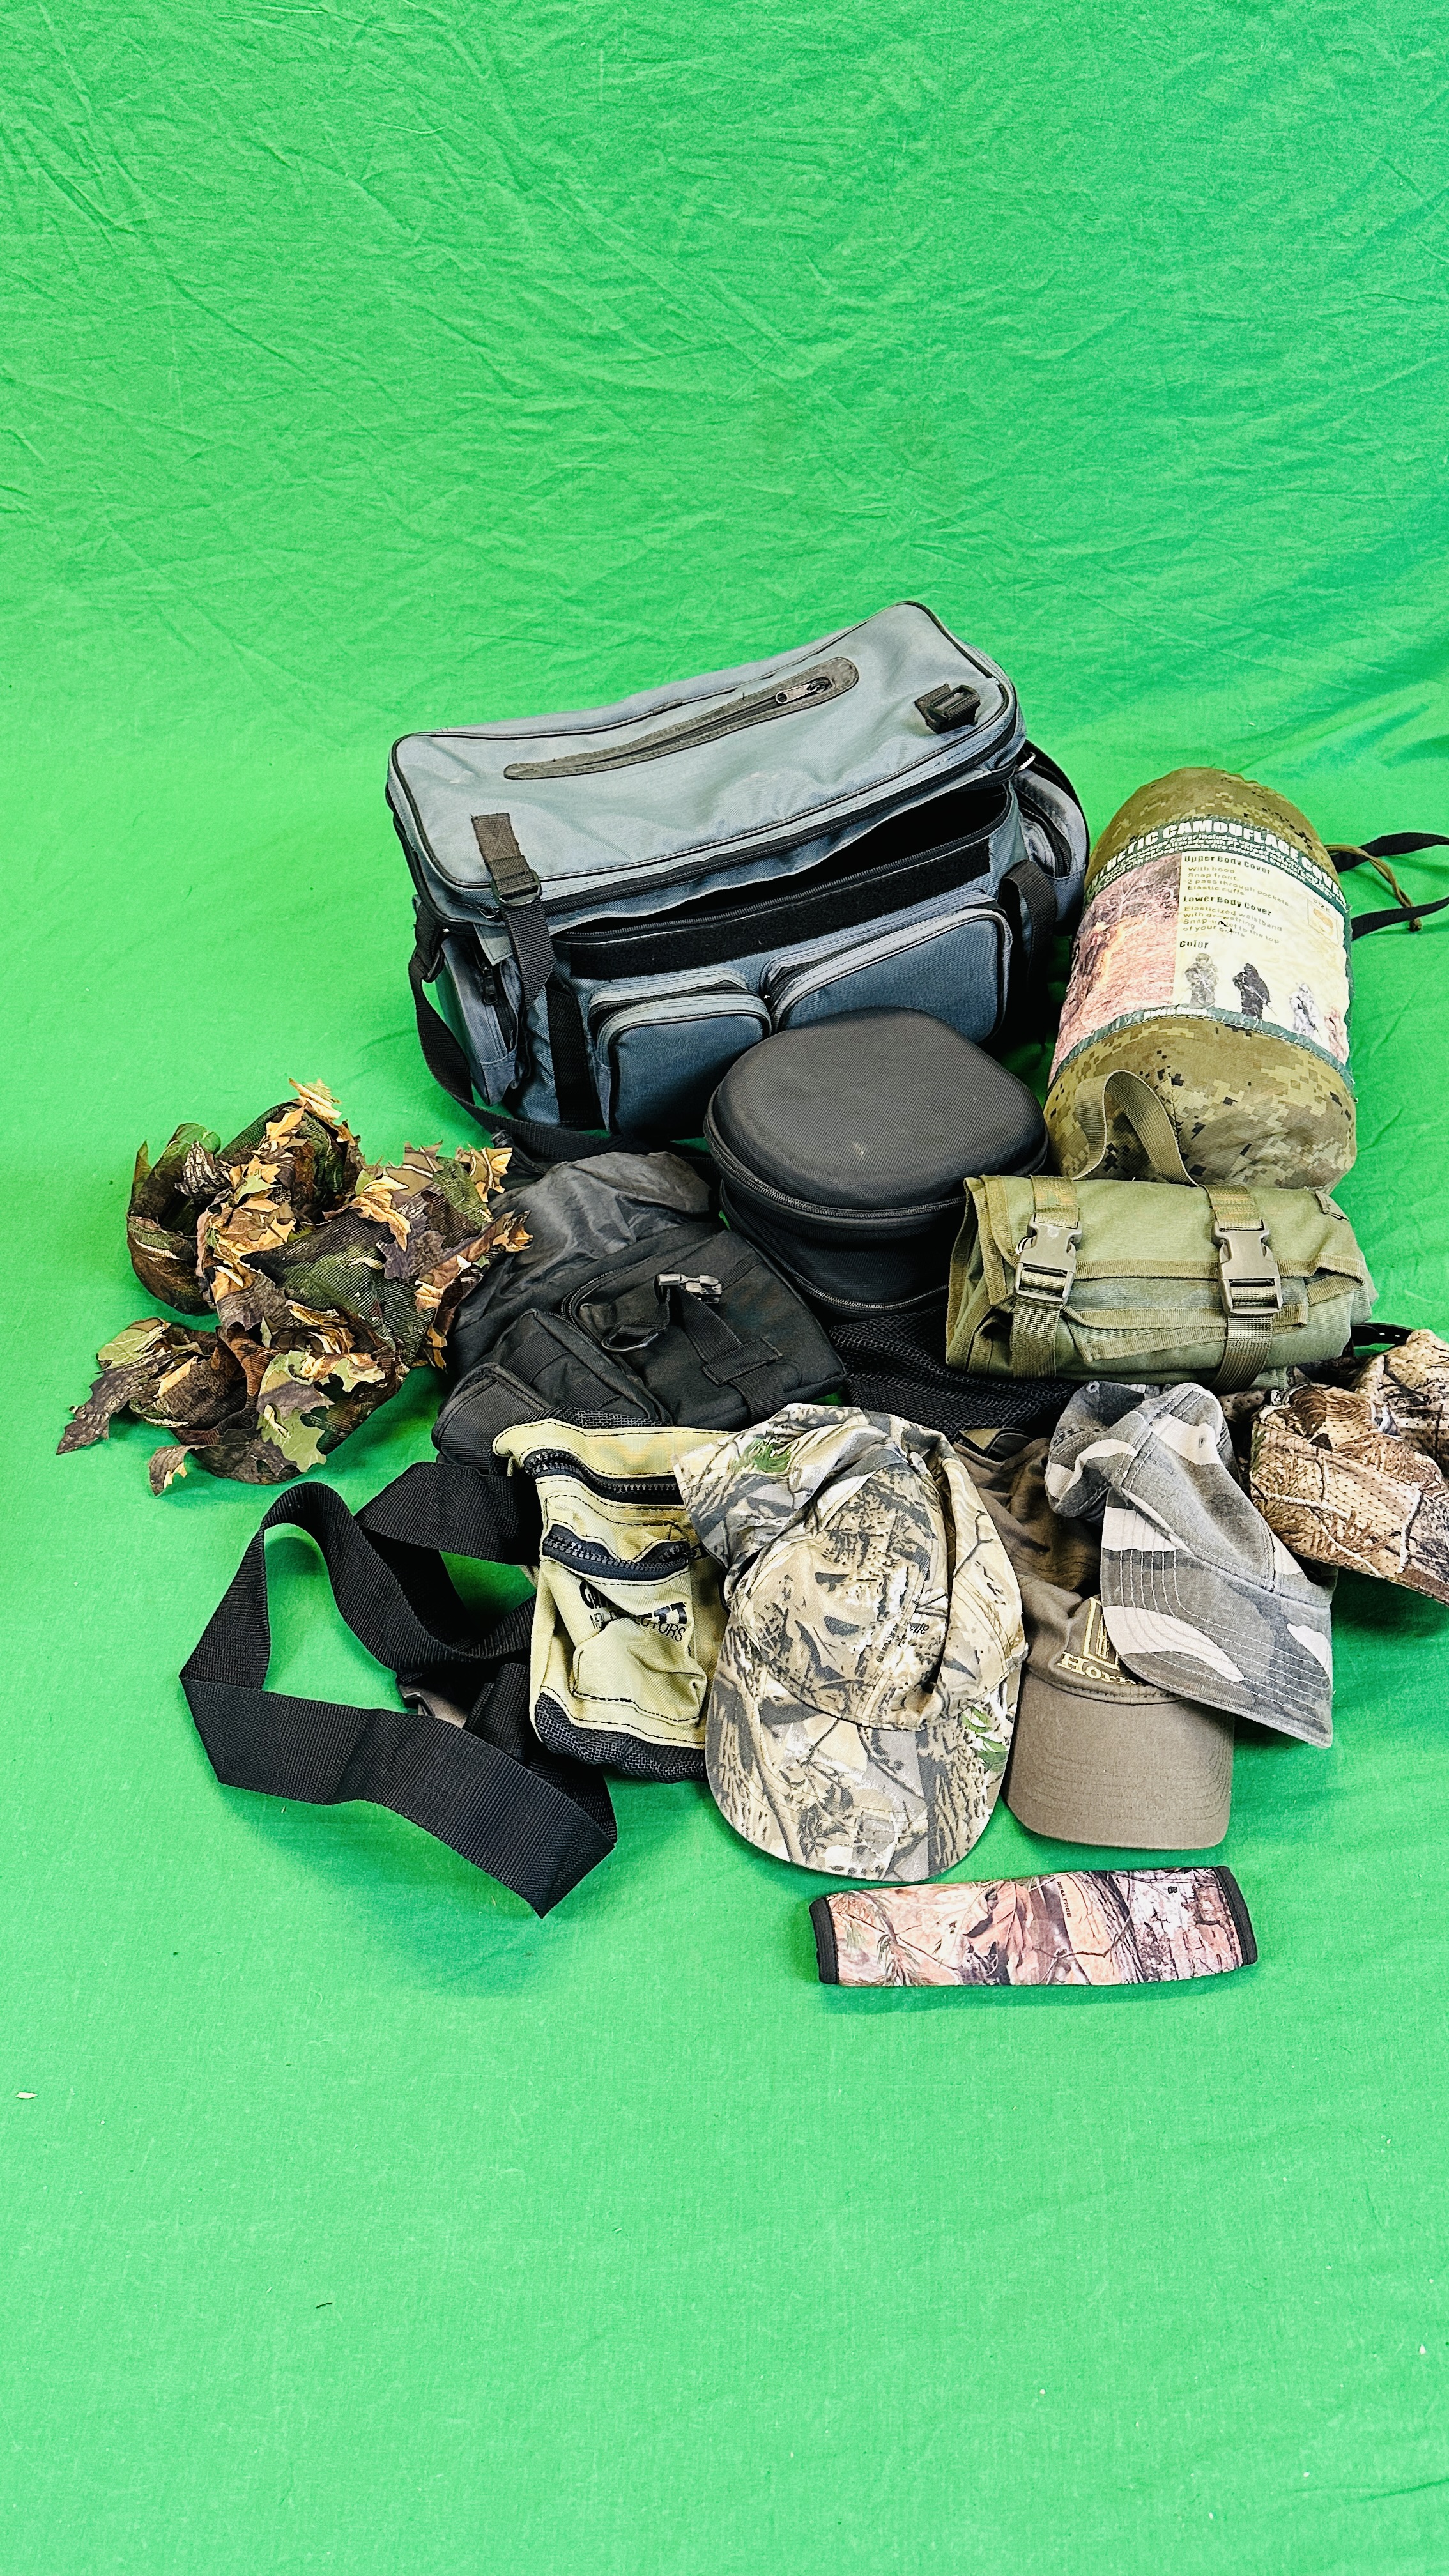 A GROUP OF SHOOTING ACCESSORIES TO INCLUDE 3-D SYNTHETIC CAMOUFLAGE COVER SUIT XL - 2XL,